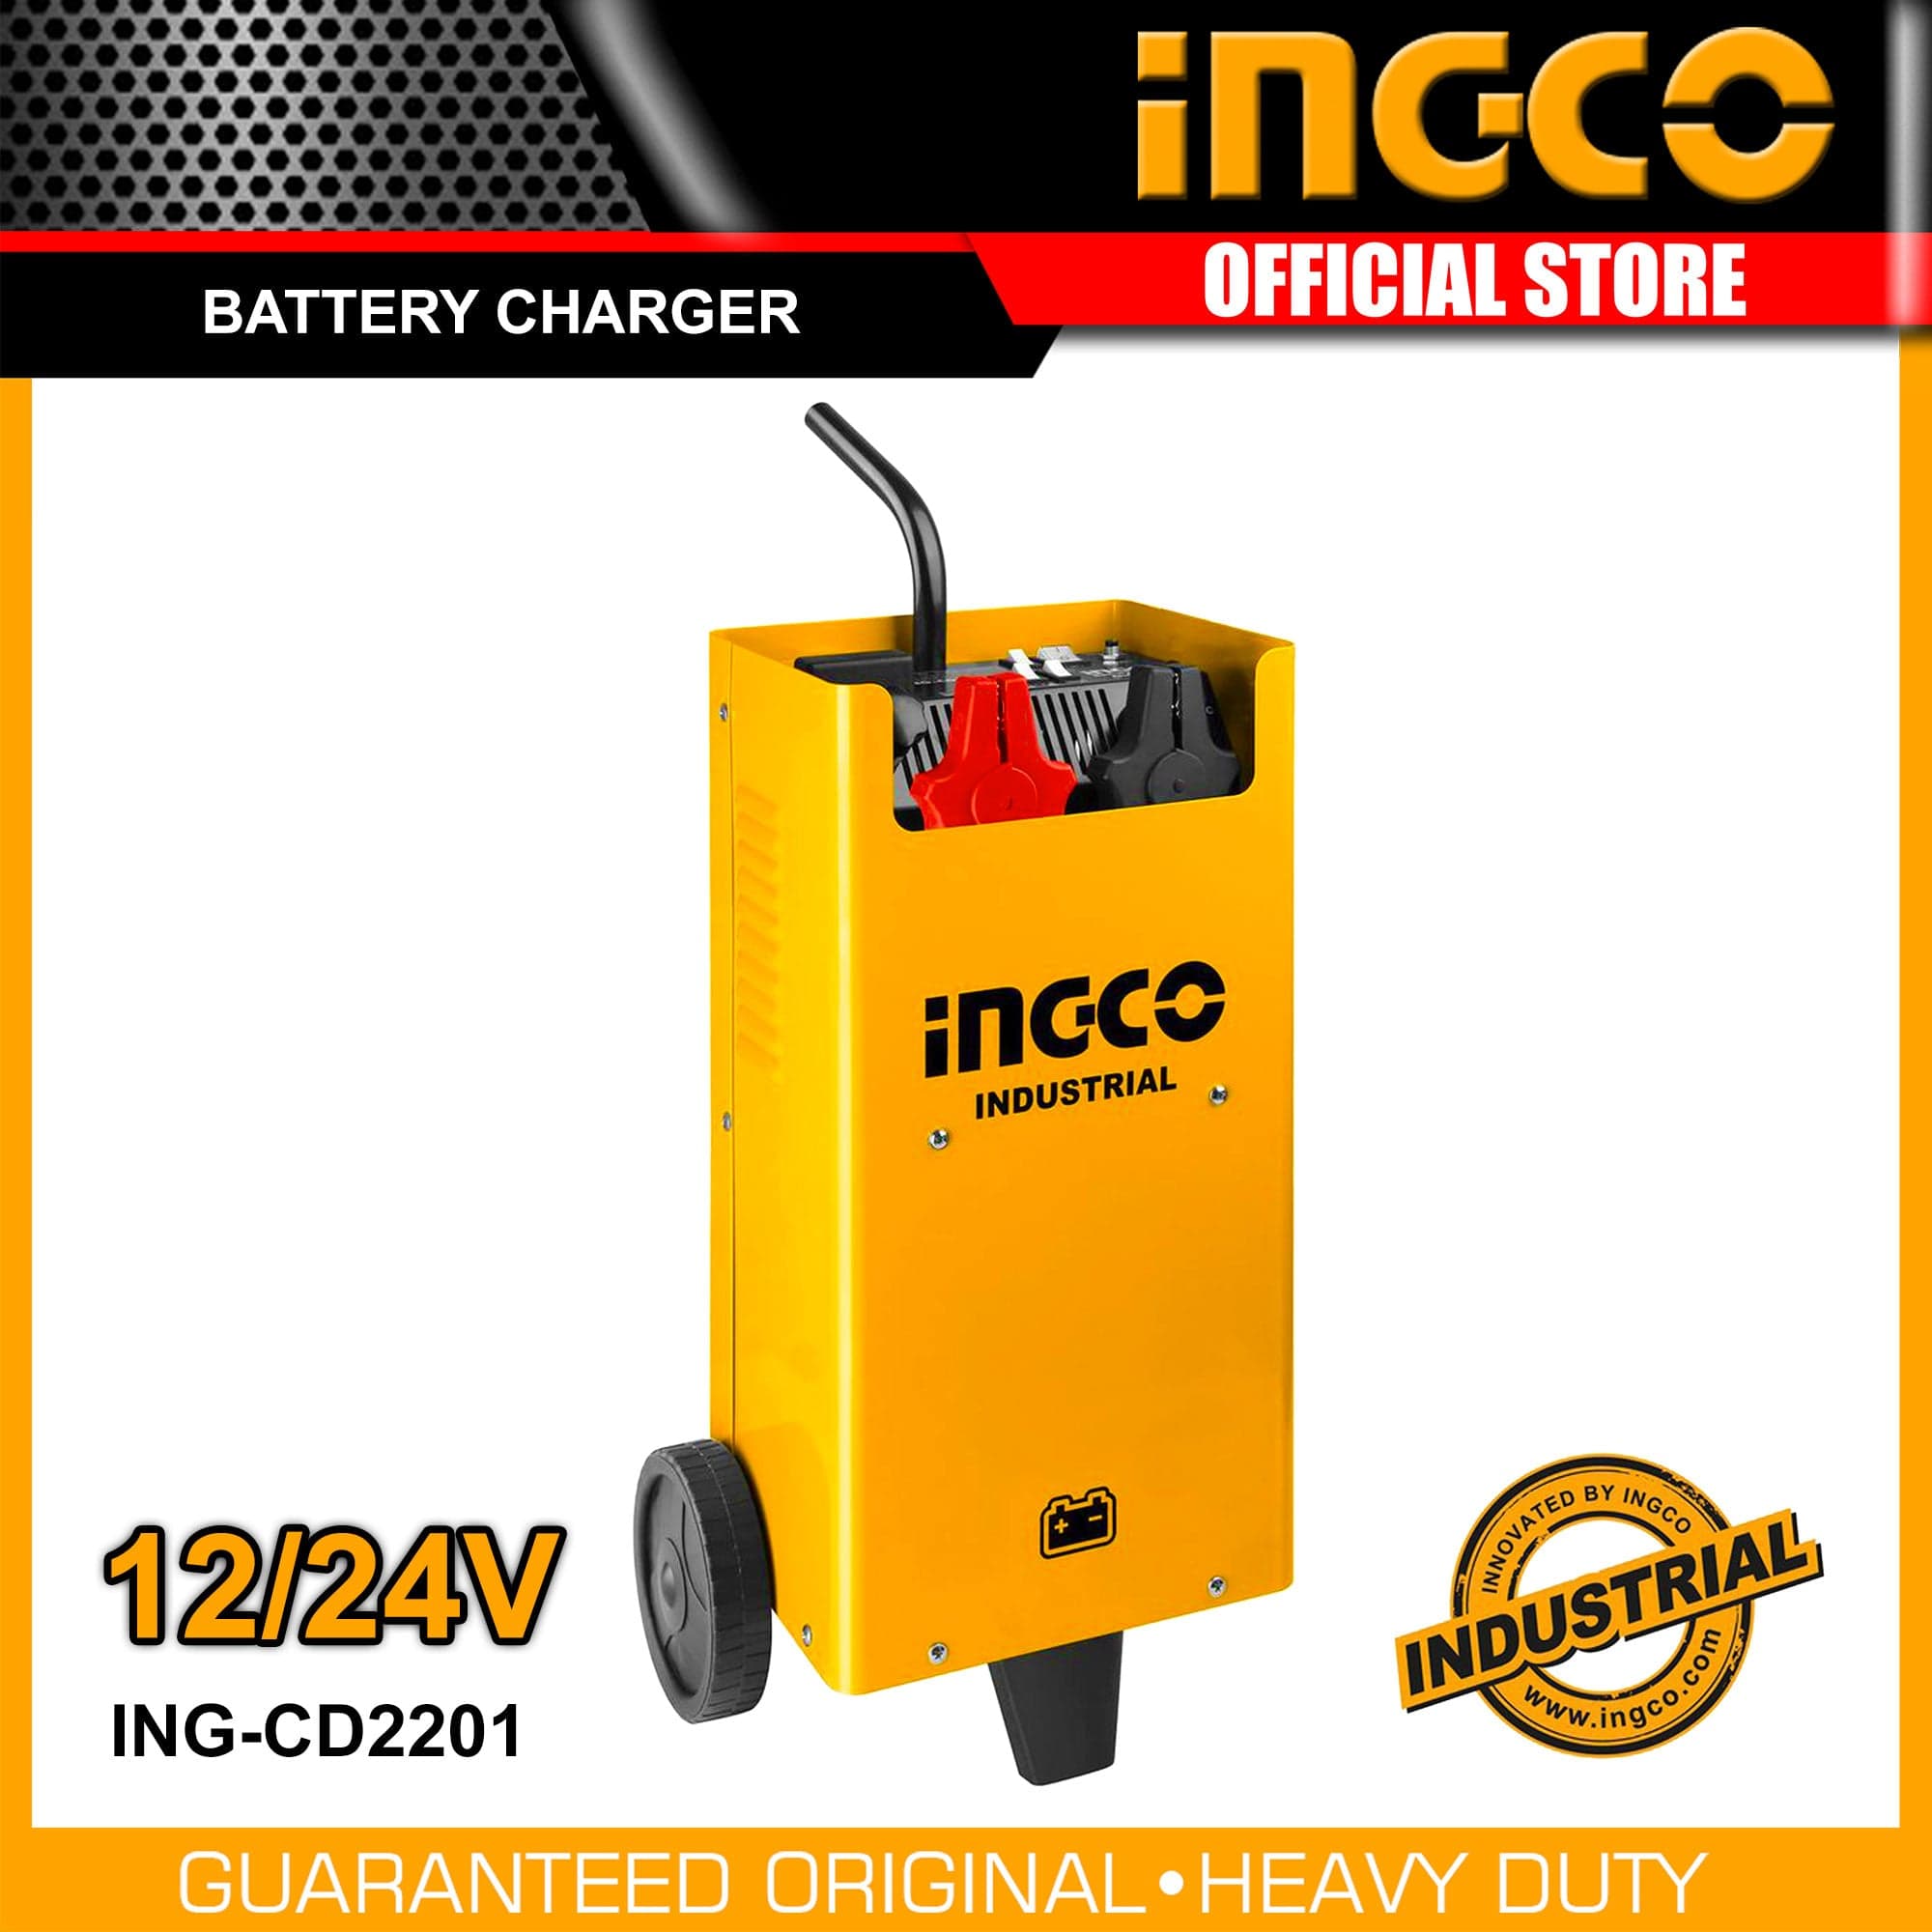 Ingco Portable Battery Charger - CD2201 | Buy Online in Accra, Ghana - Supply Master Welding Machine & Accessories Buy Tools hardware Building materials